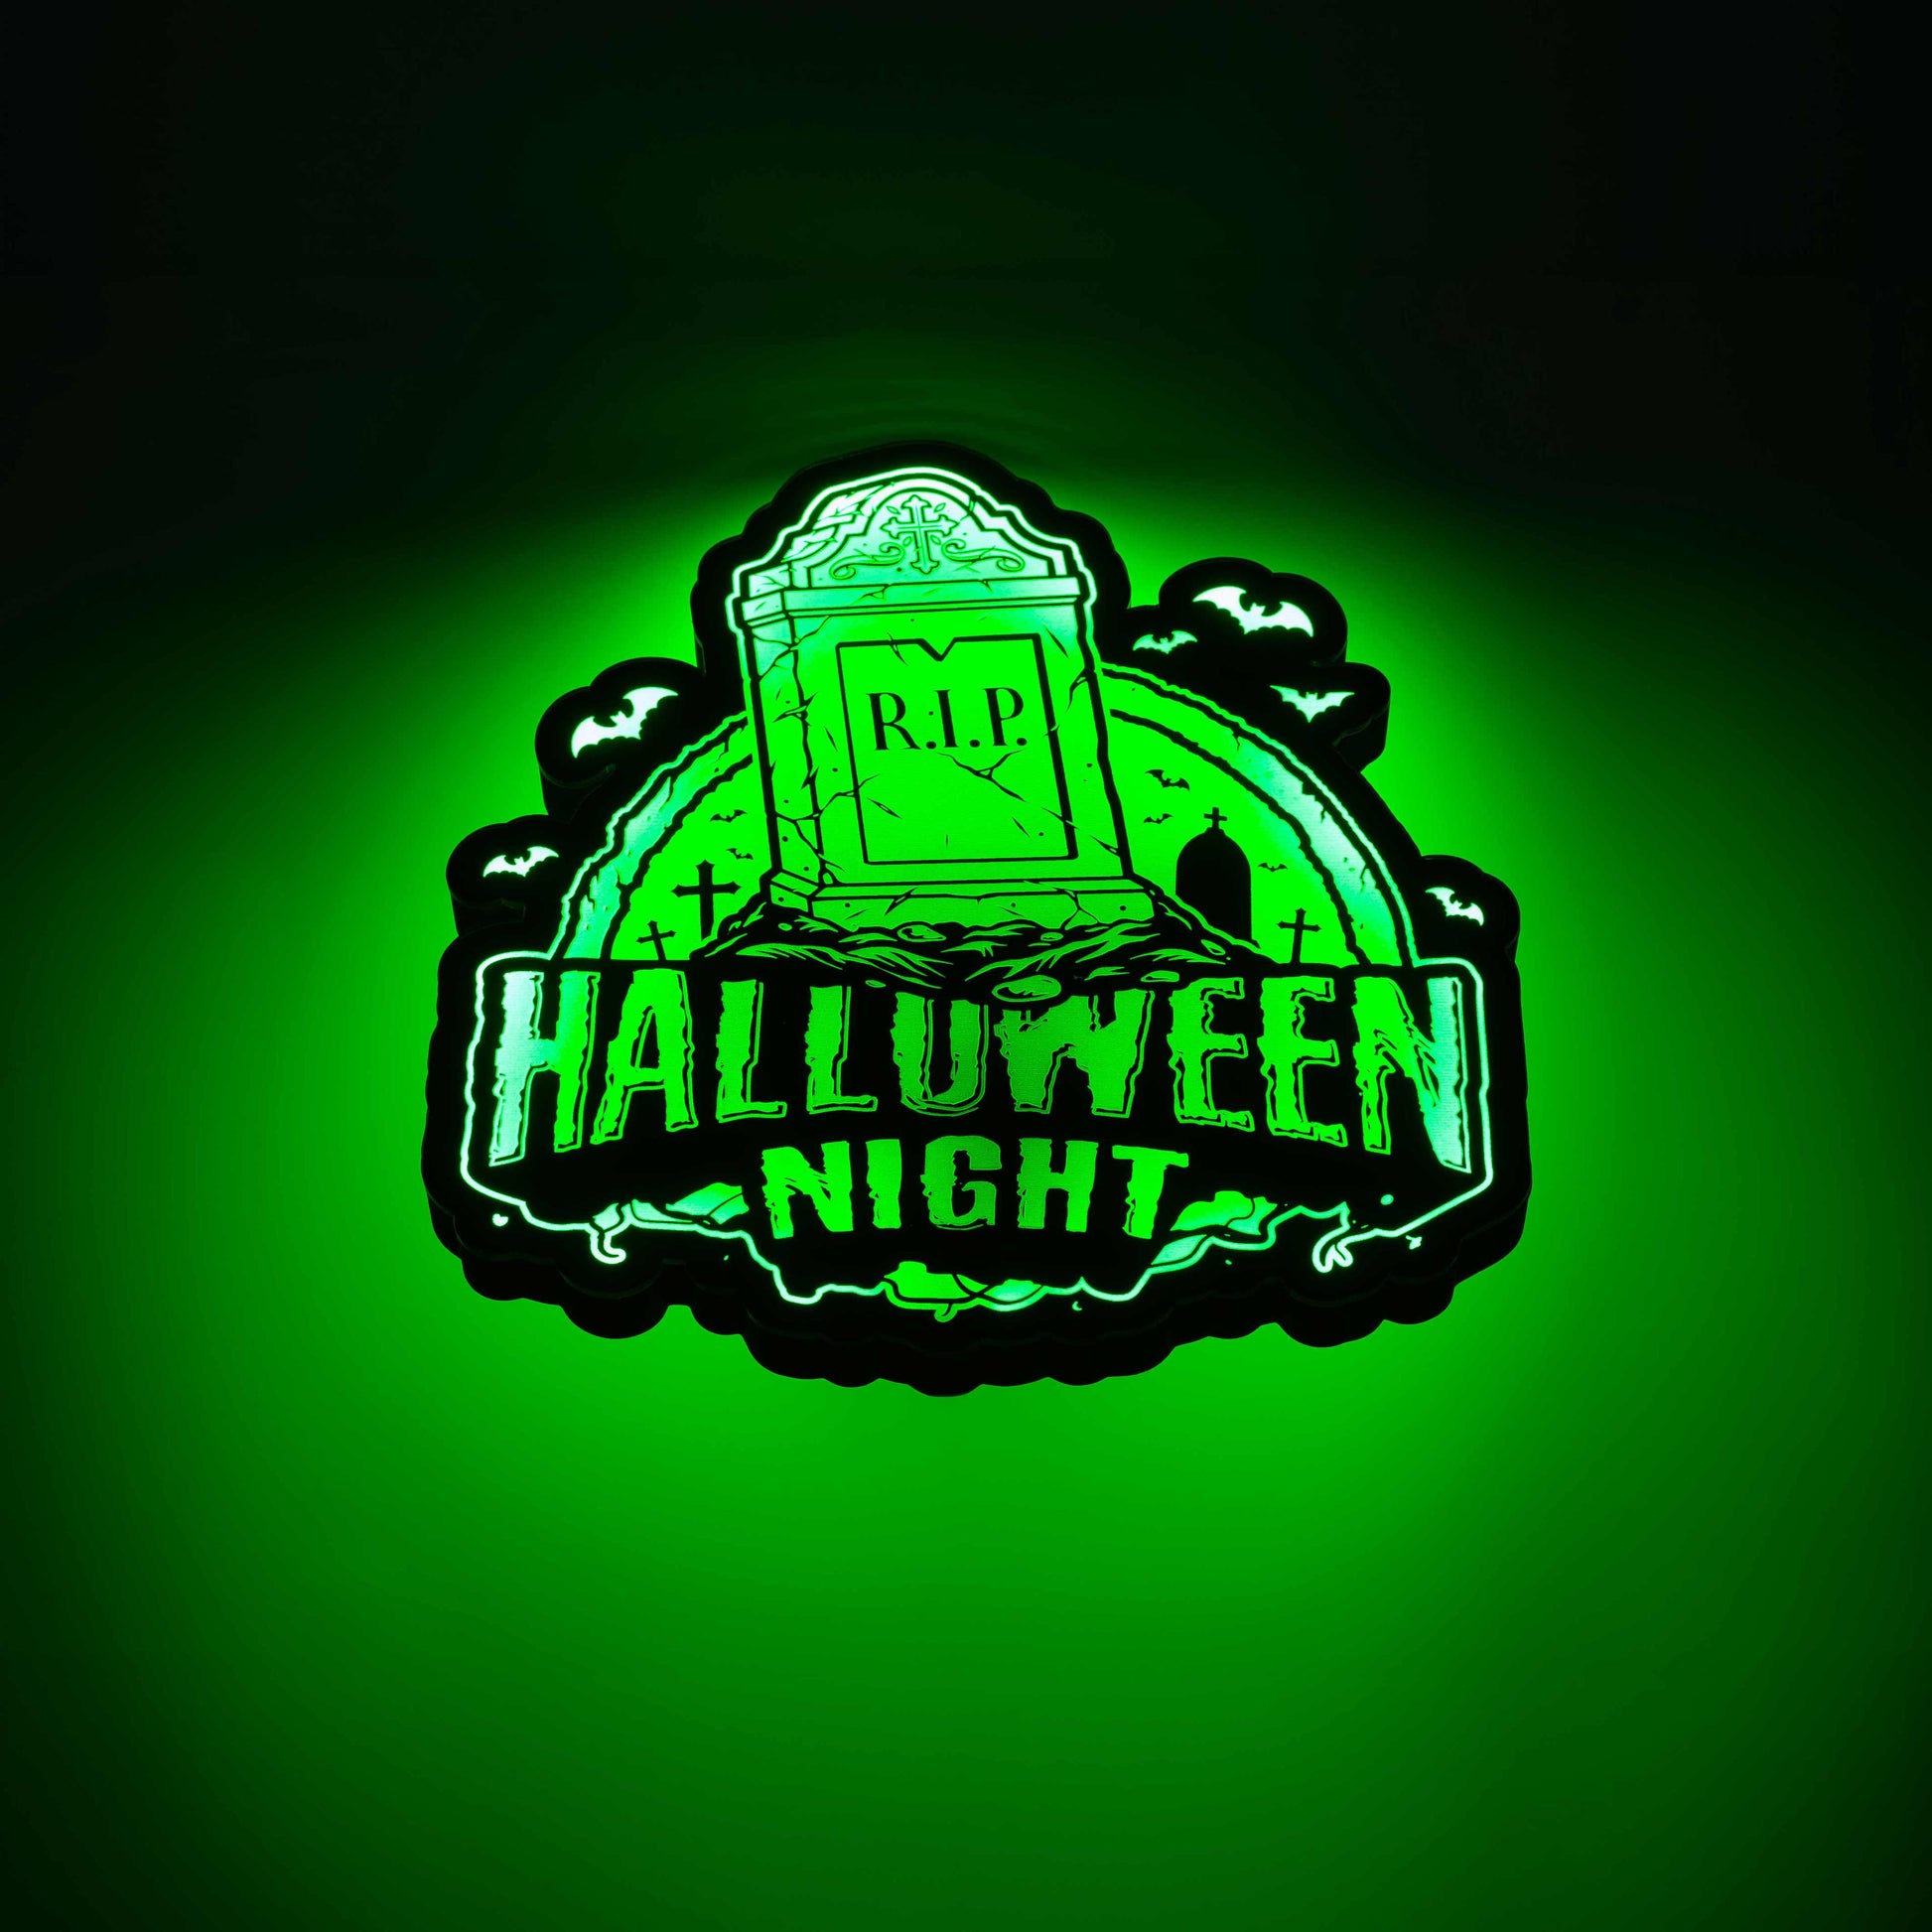 a 3d wall mounted acrylic light, backlit by multi-color led lights, featuring a cartoon style scary halloween themed illustration. A scary tomb stone rises up from a haunted grave yard scene complete with bats and spooky halloween themed text that reads "halloween night".